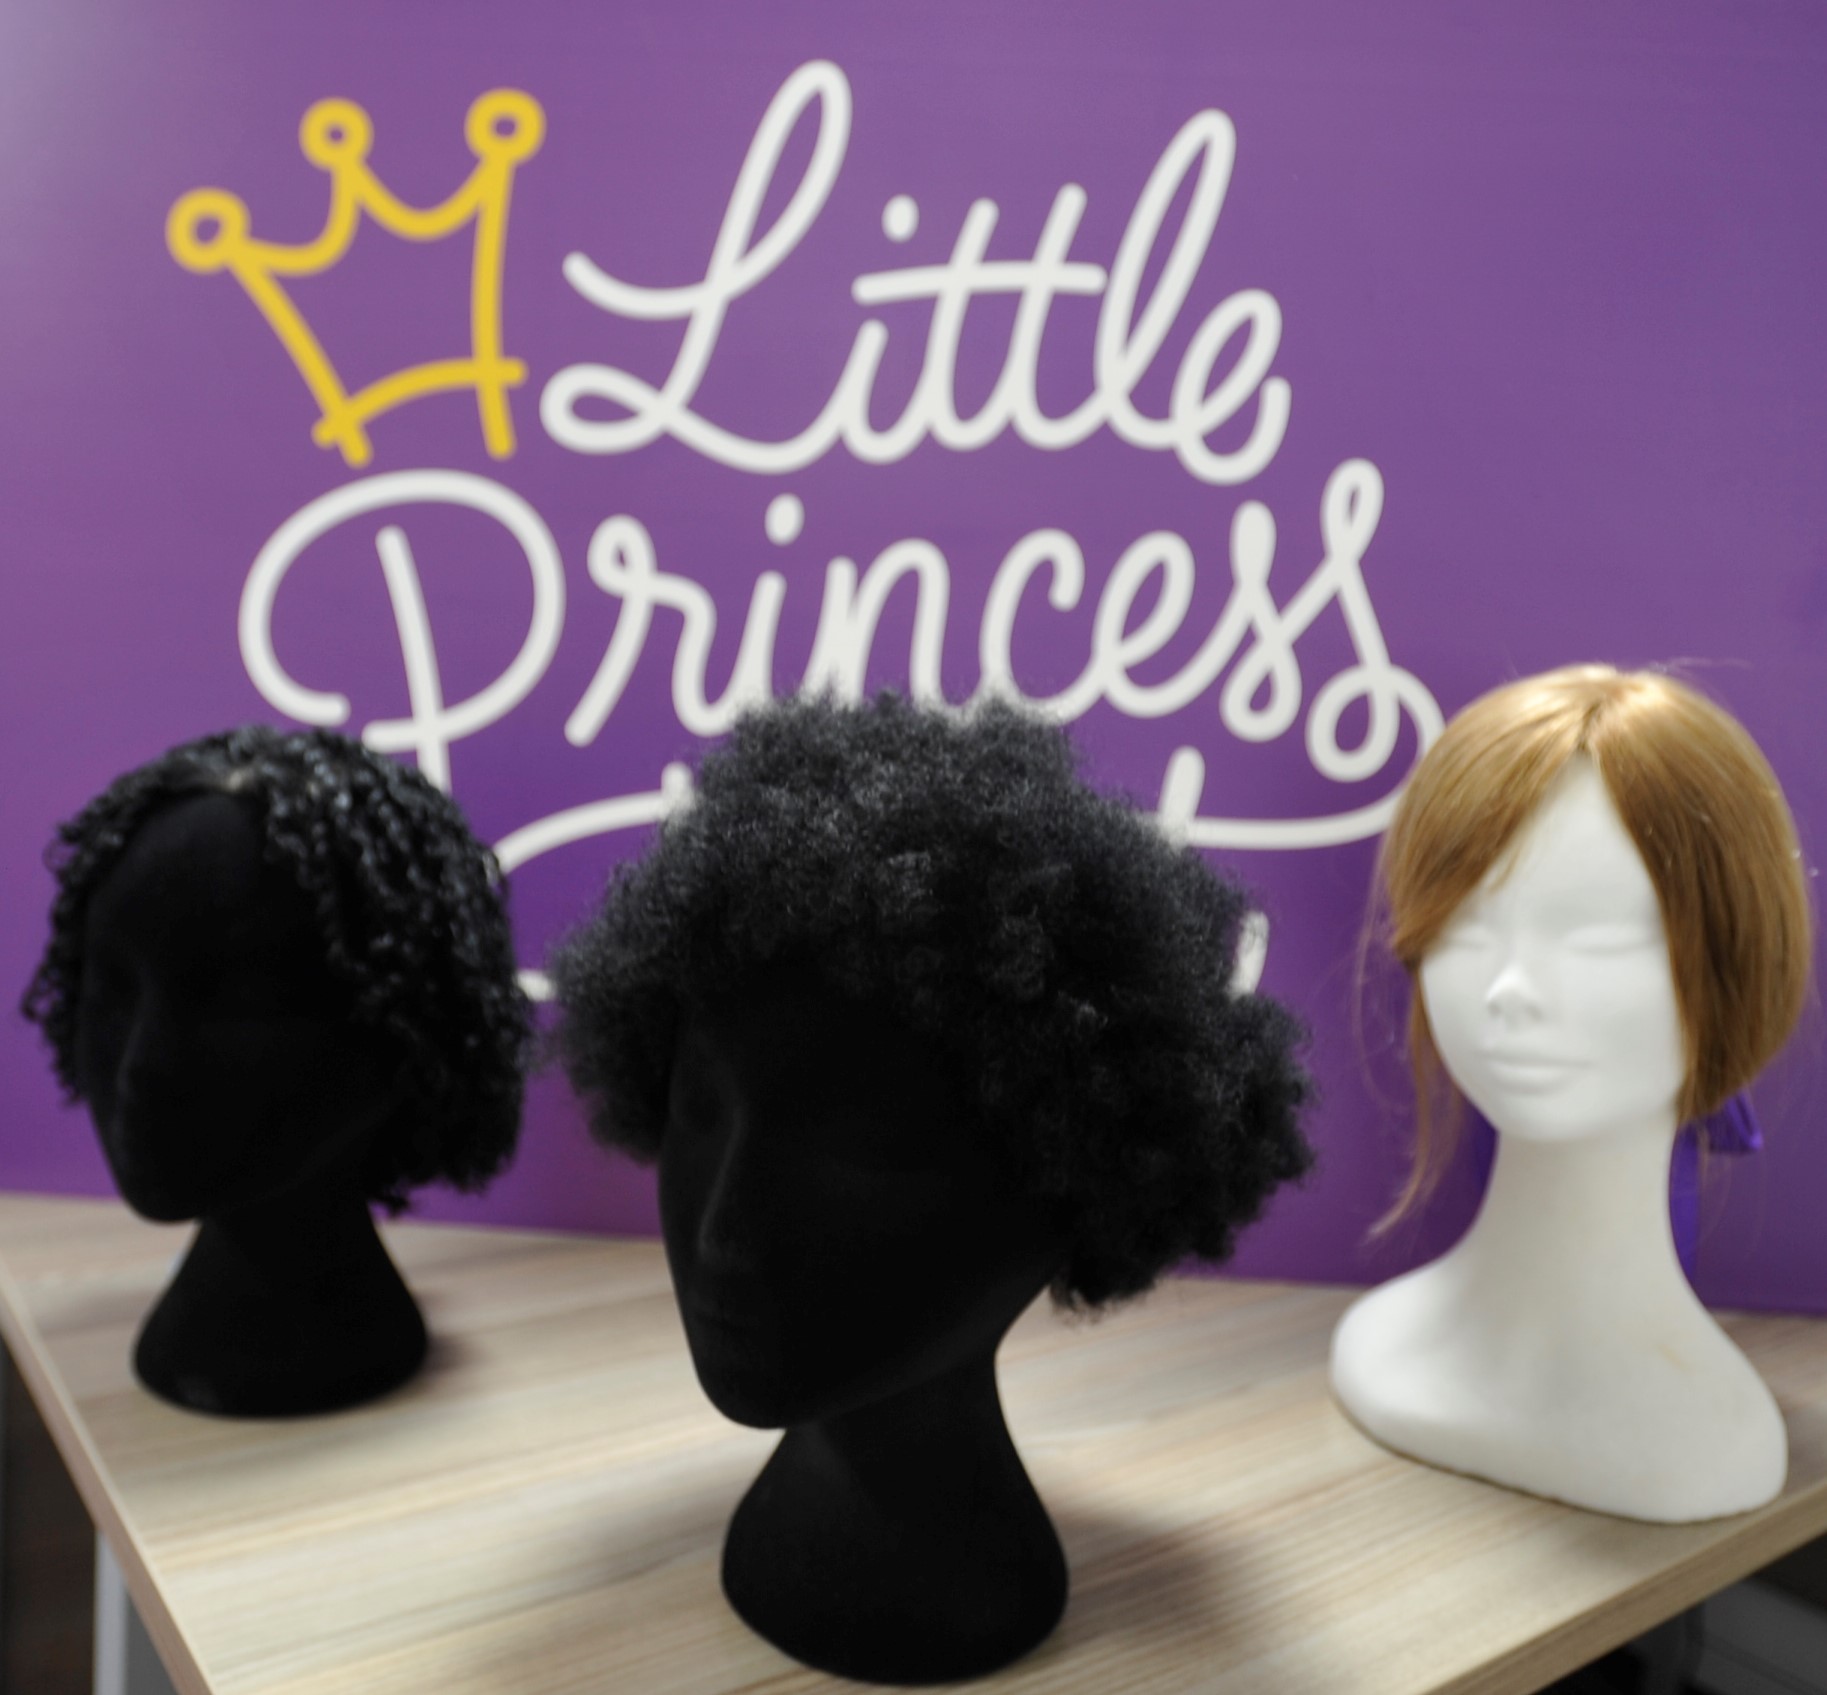 The Little Princess Trust has always offered Afro style wigs such as these here. But these were made from straight hair before being put into the desired style. The new breakthrough means we can make wigs from Afro hair donations.